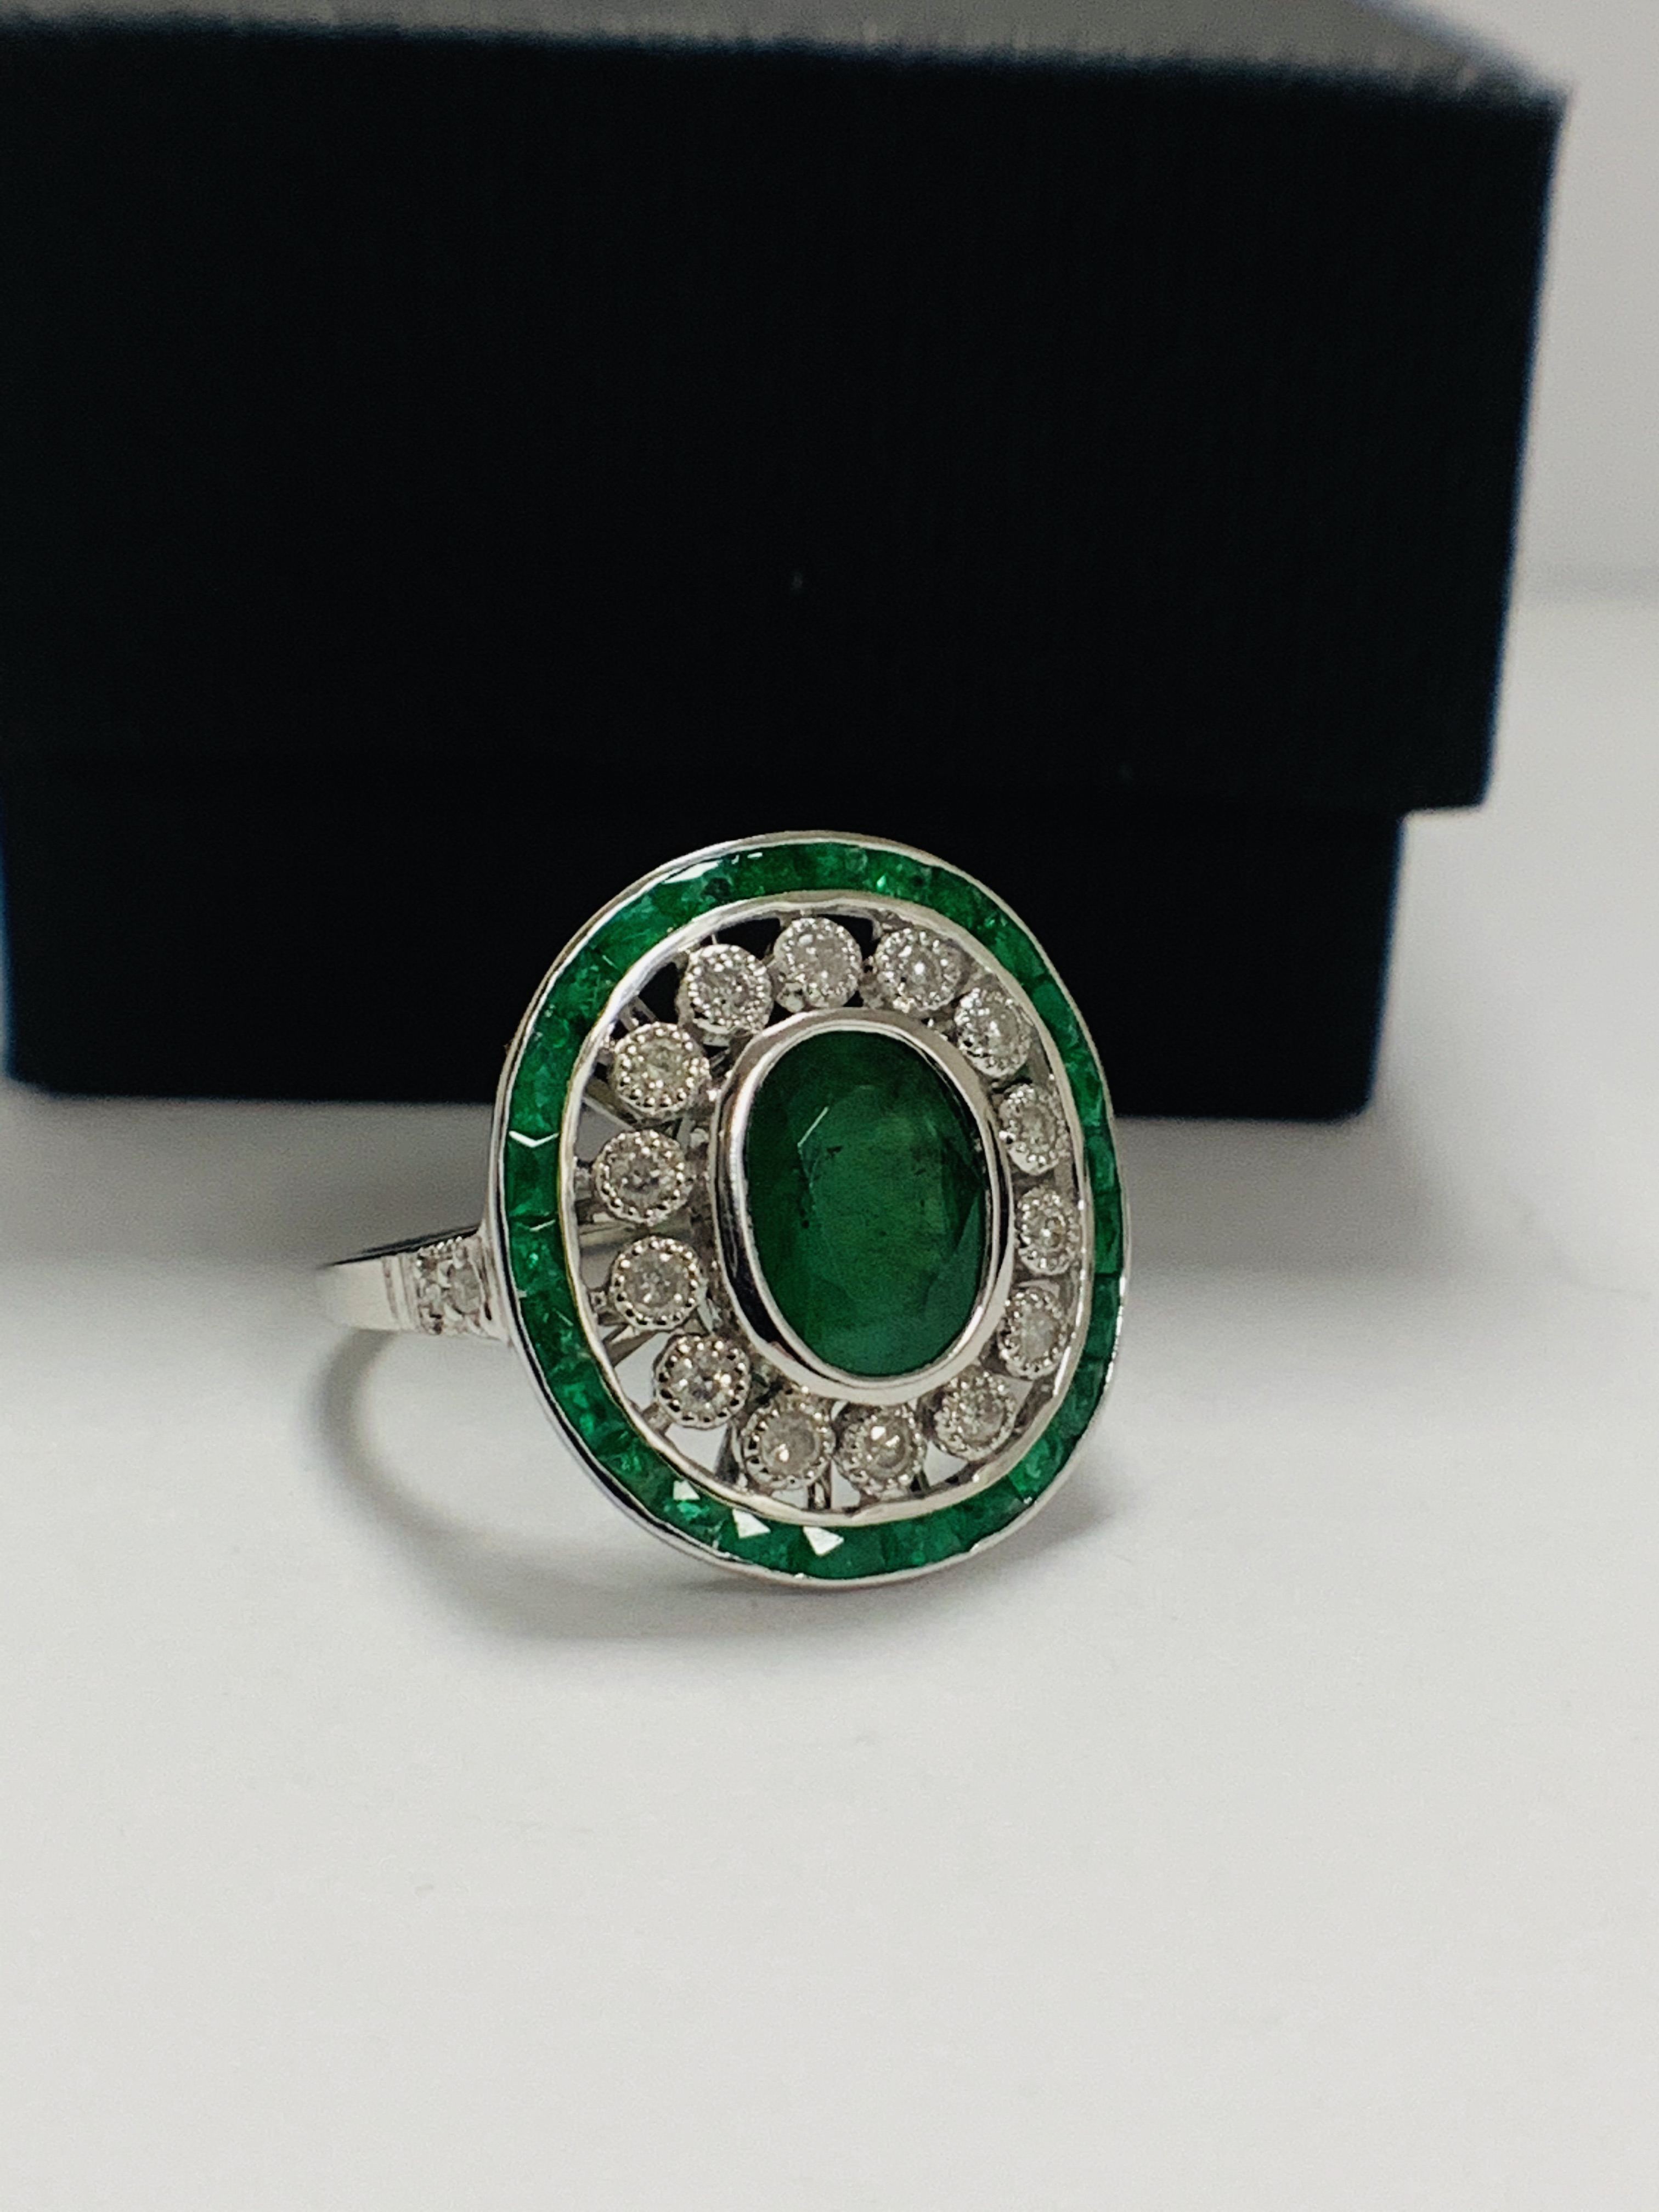 18ct White Gold Emerald and Diamond ring featuring centre, oval cut, green Emerald (2.06ct), claw se - Image 8 of 11